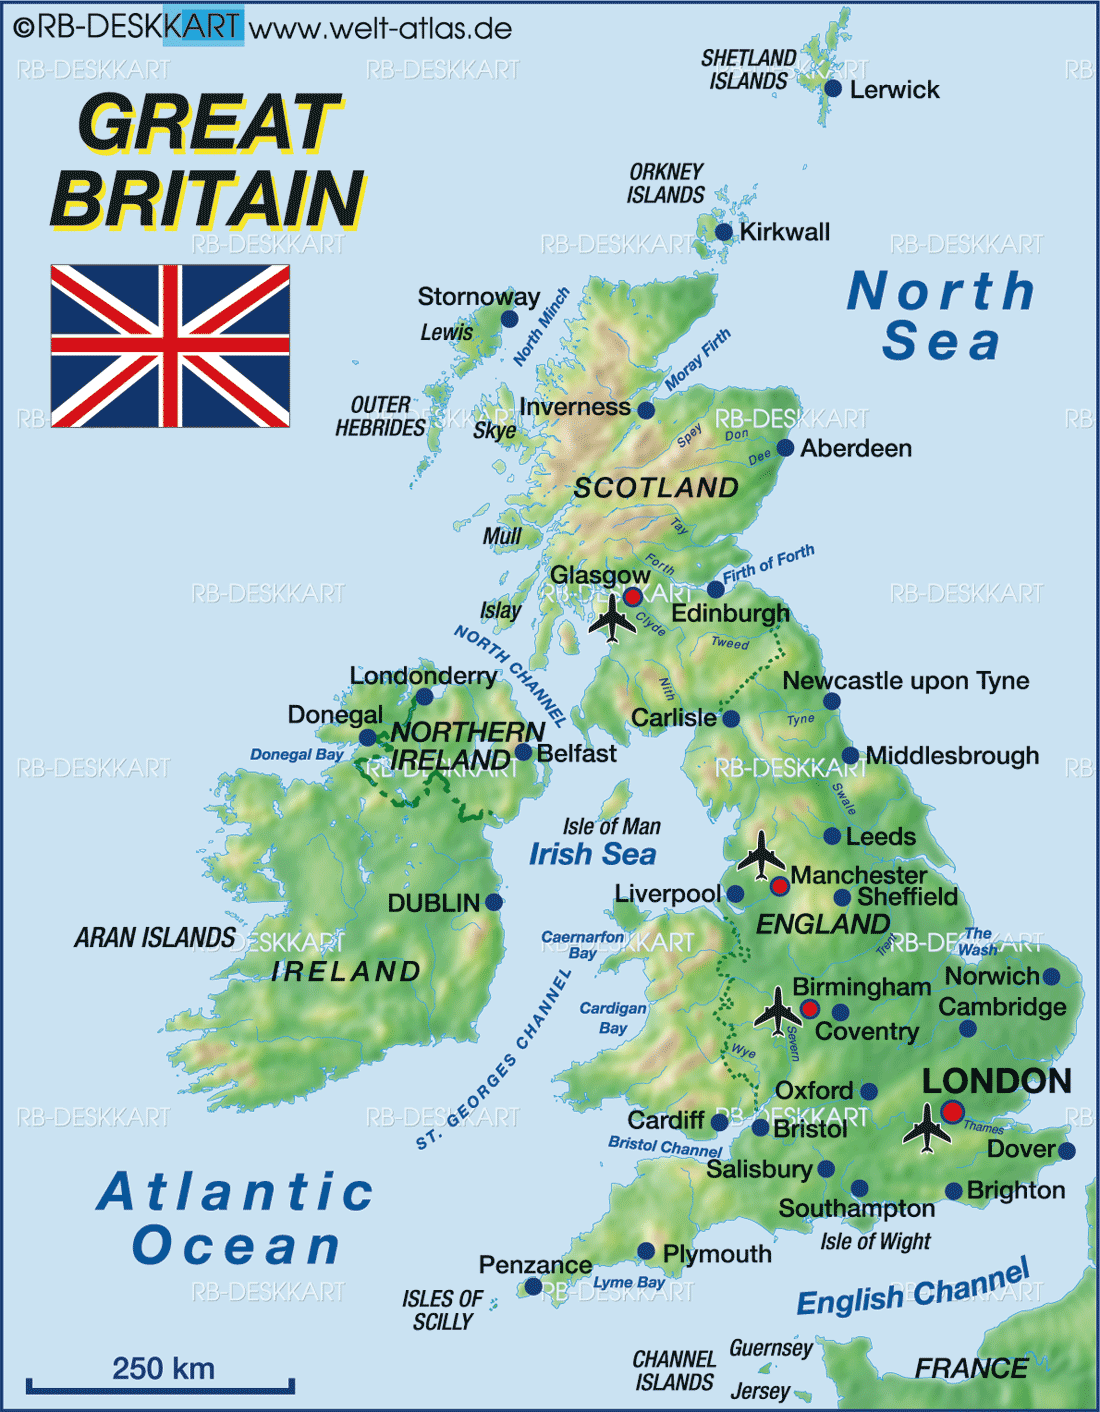 The smallest island is great britain. The United Kingdom of great Britain карта. The United Kingdom of great Britain and Northern Ireland карта. Карта the uk of great Britain and Northern Ireland. Great Britain Map geographical.